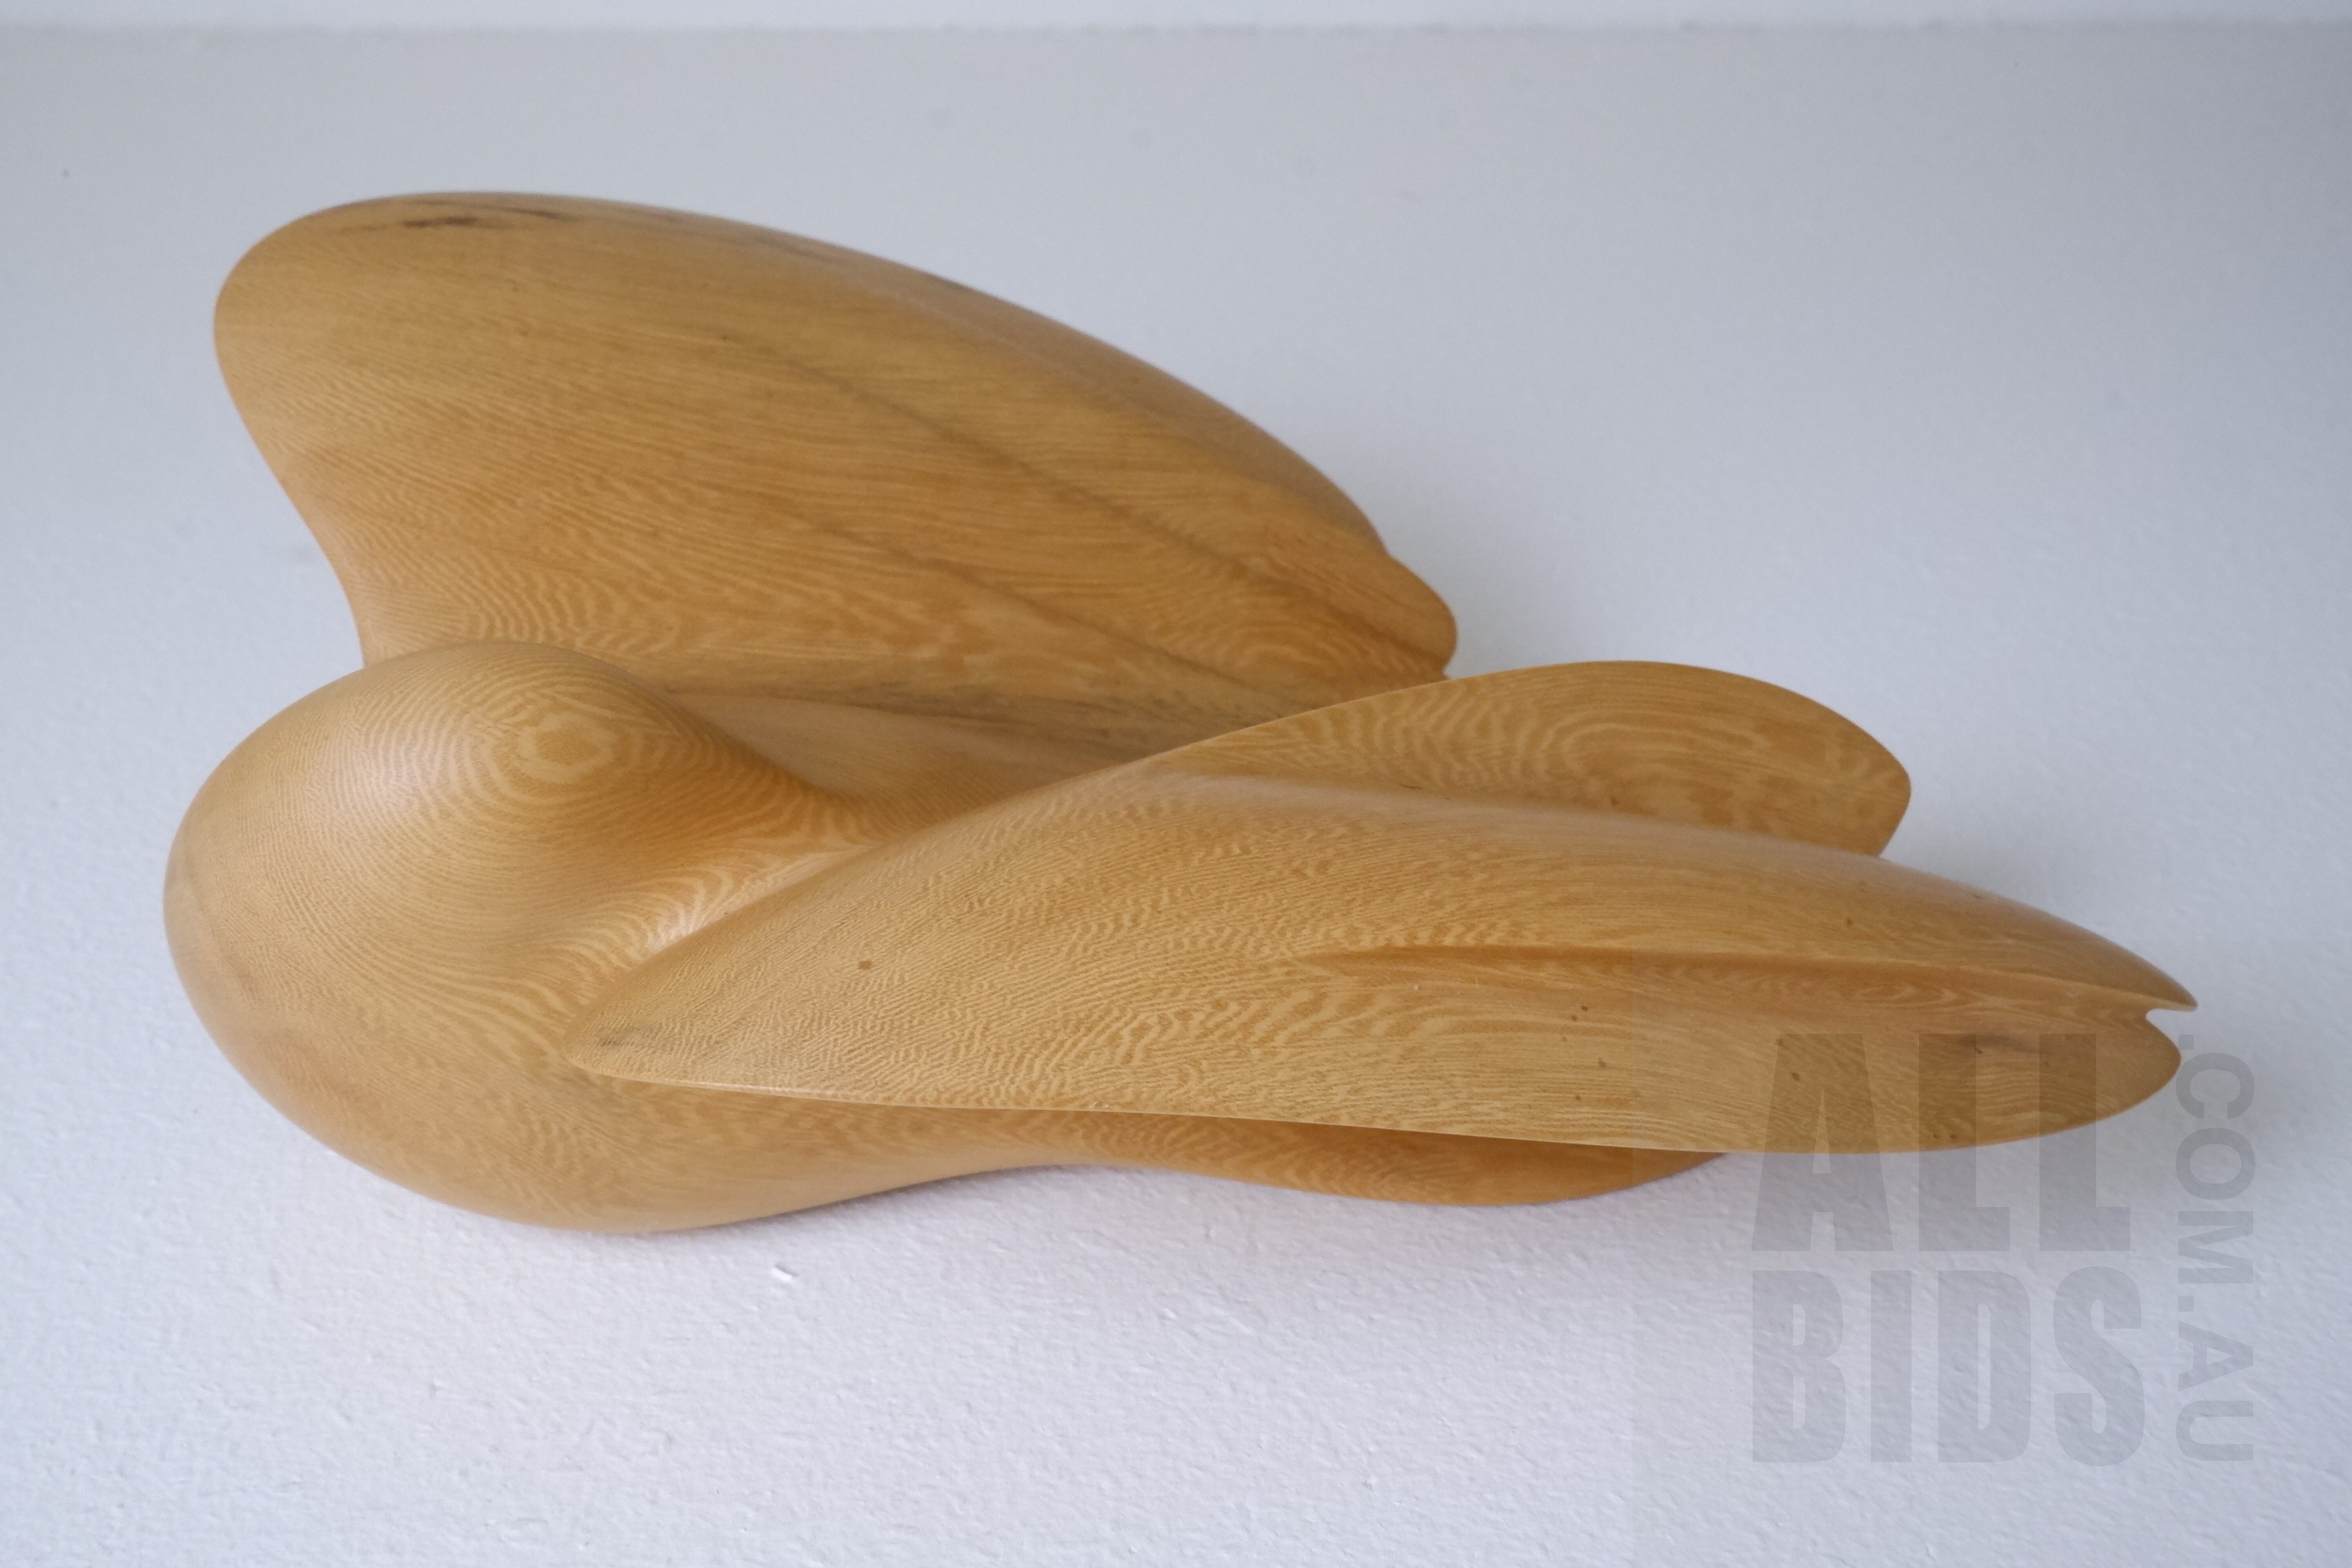 'Peter Carrigy, Bespoke Huon Pine Carving of Dove in Flight'